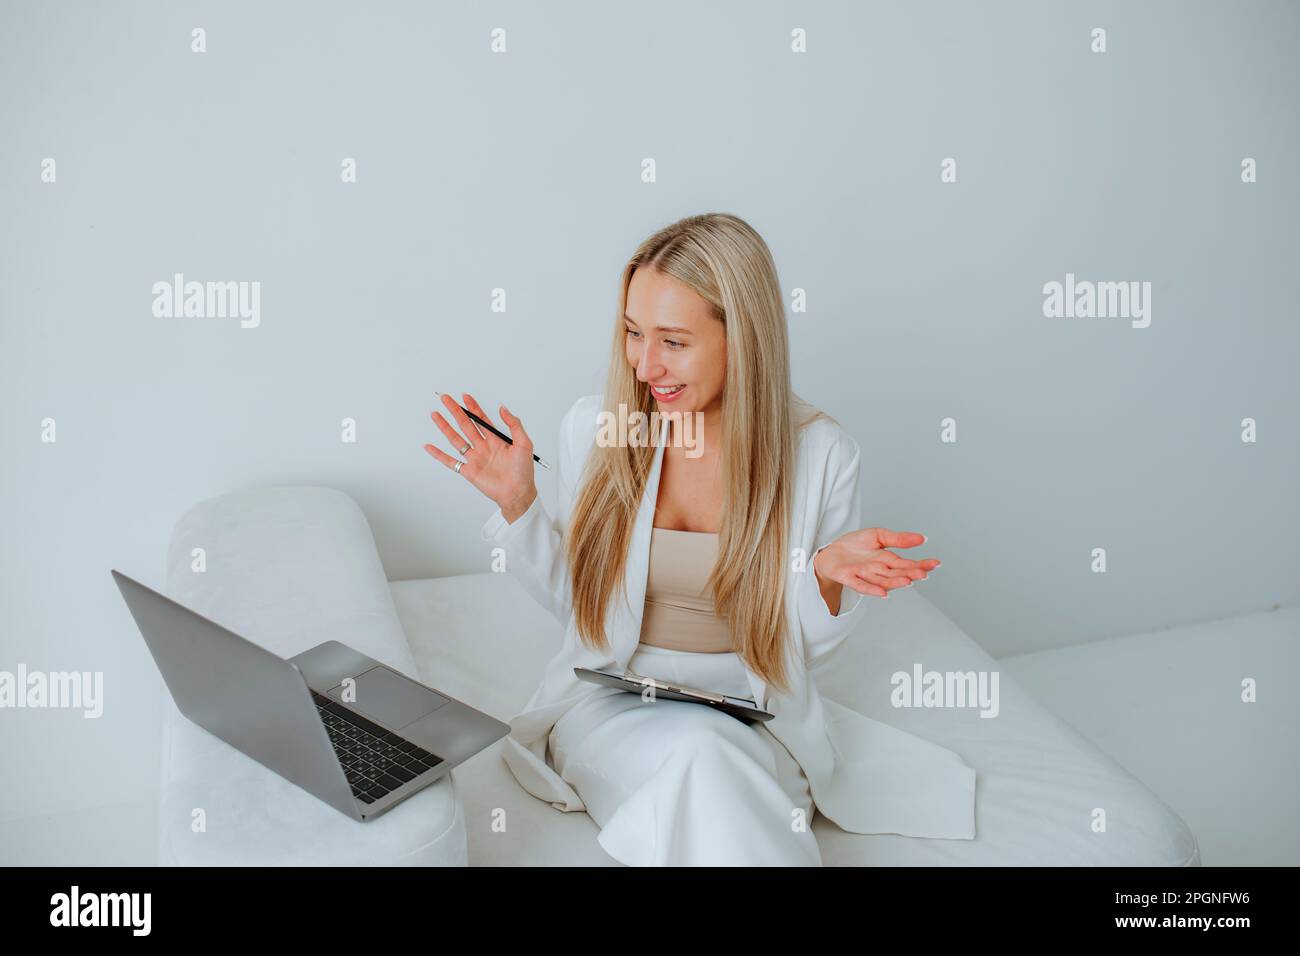 Happy psychologist gesturing through laptop sitting on couch in office Stock Photo